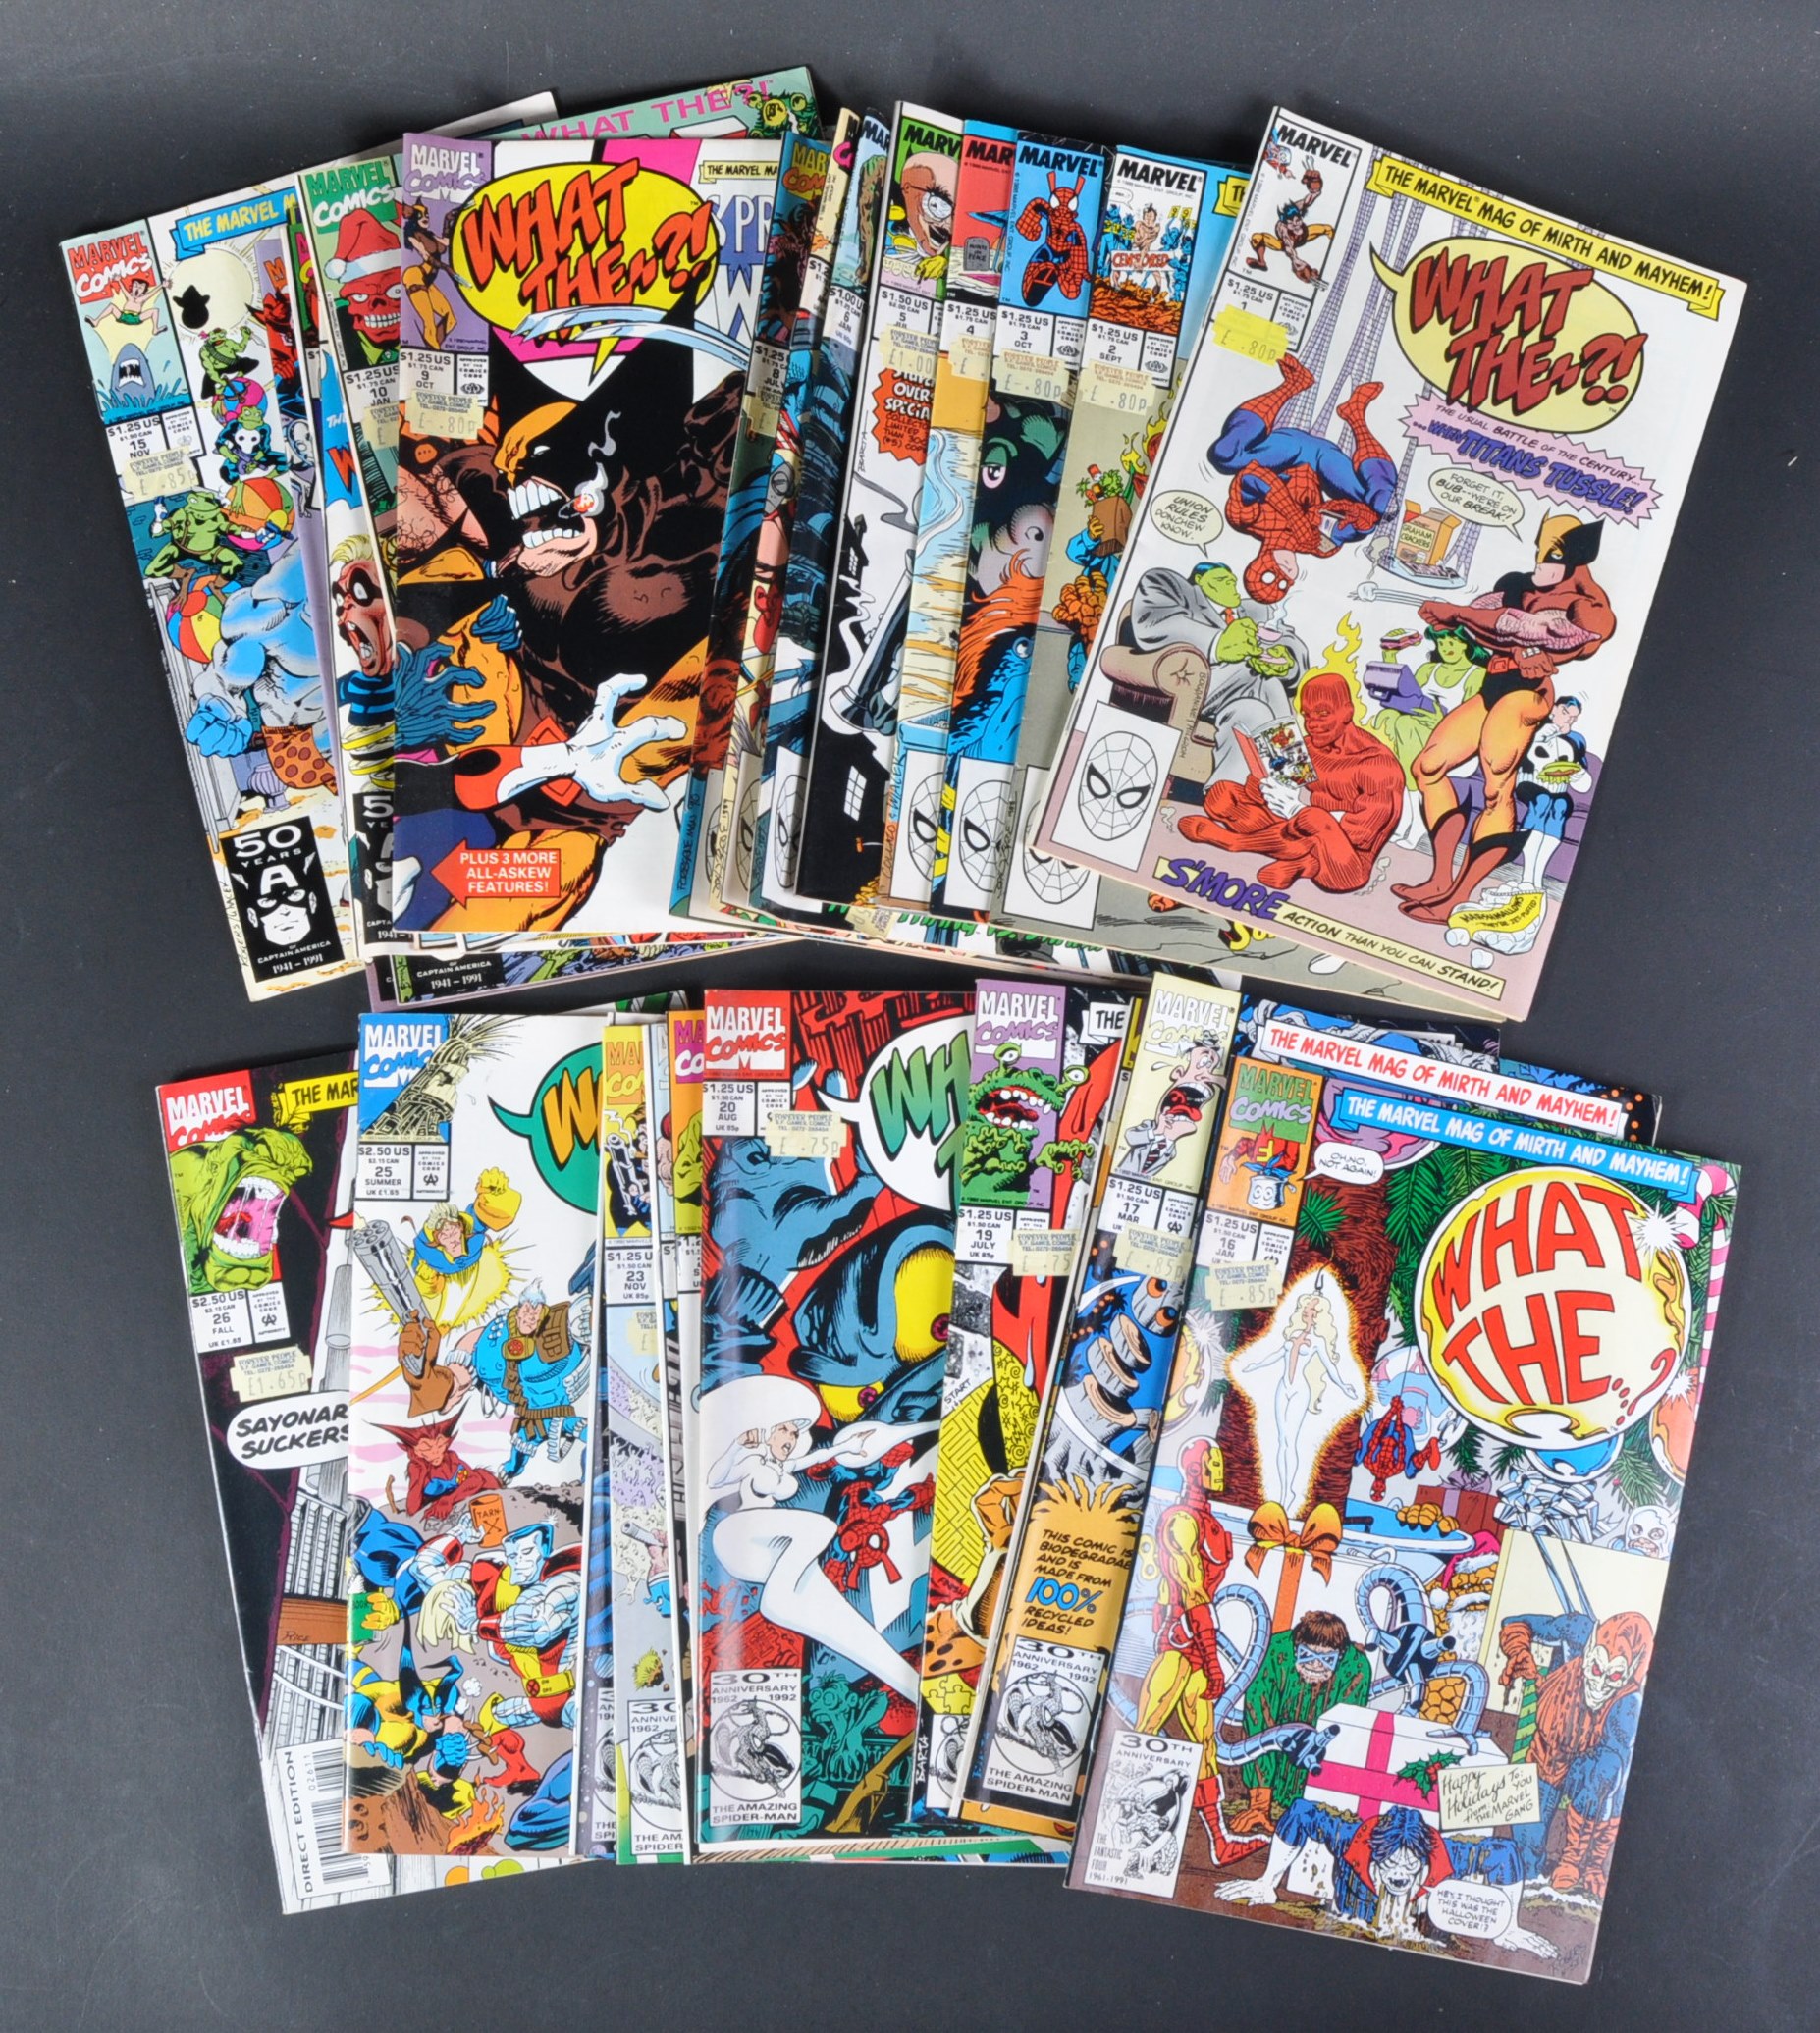 MARVEL COMICS - WHAT THE ..?! - COMPLETE RUN OF COMIC BOOKS